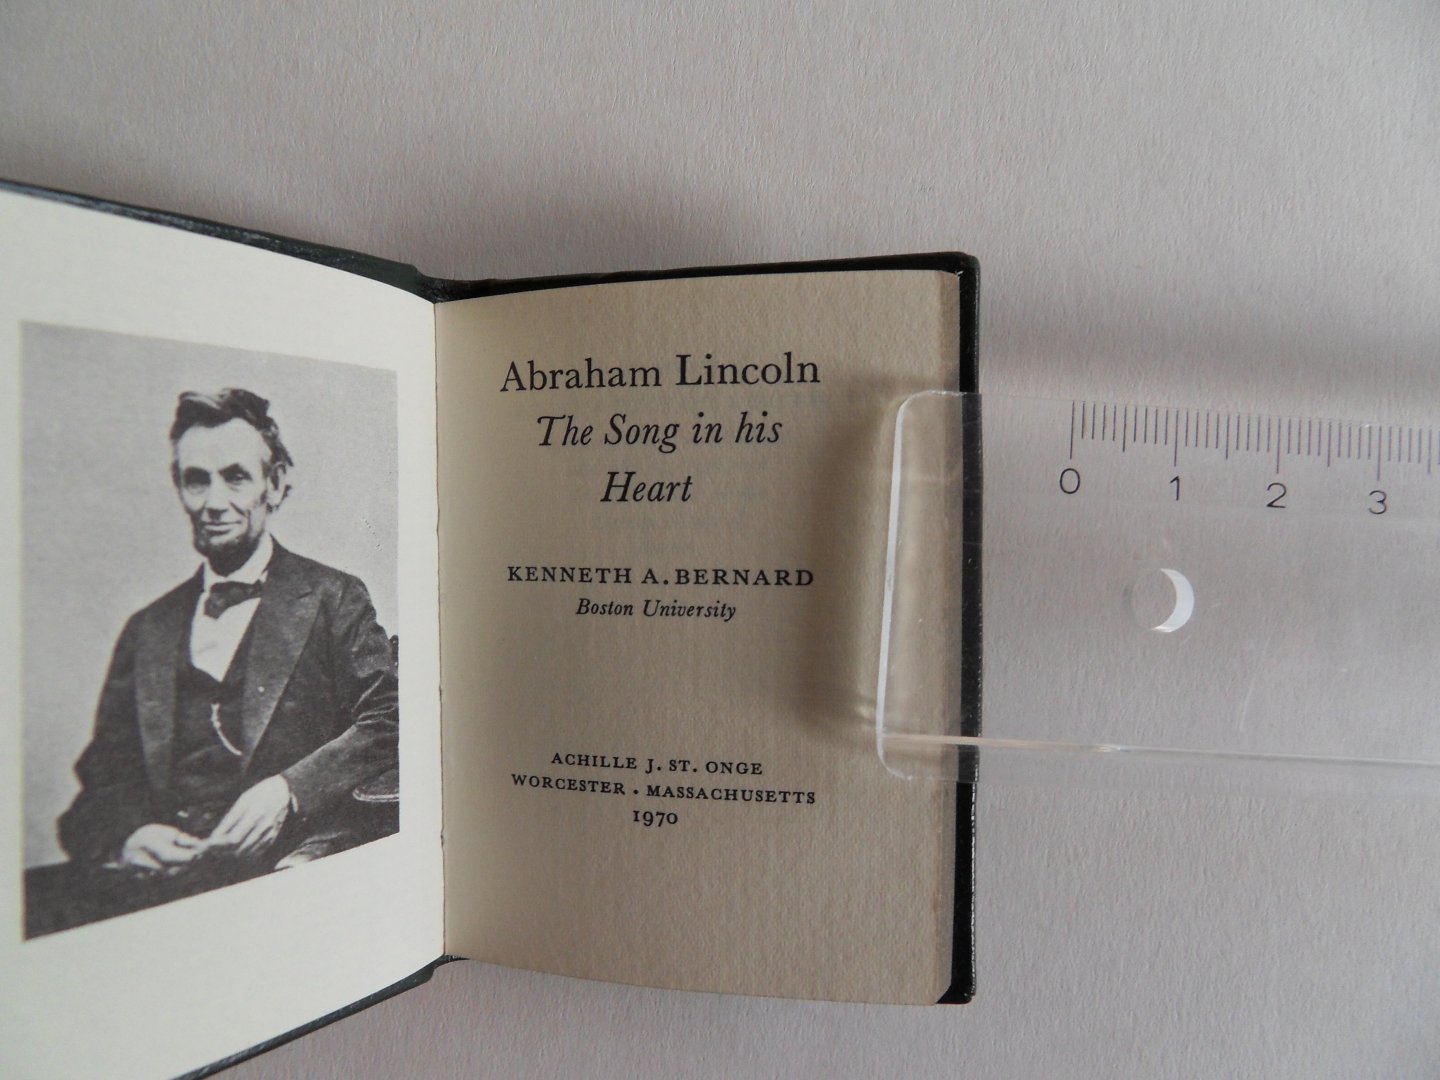 Bernard, Kenneth A. - Abraham Lincoln. - The Song in His Heart. [ Oplage van 1500 exemplaren - 1500 copies only ].